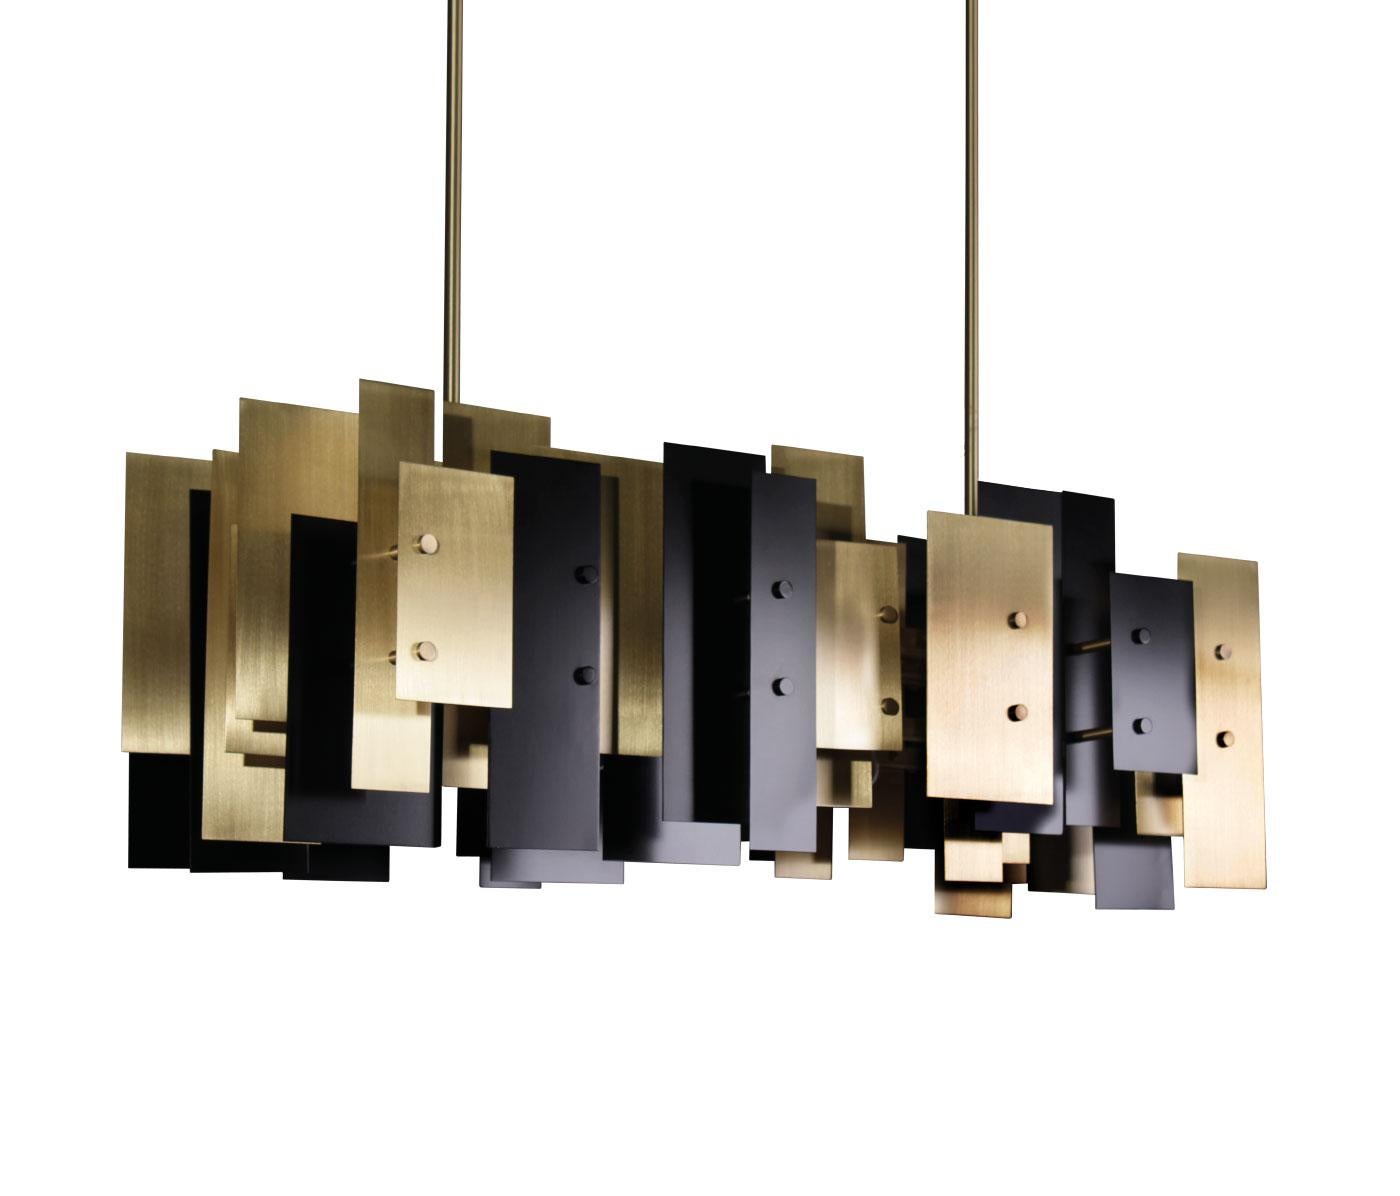 The shape of our magnificent Fo Tan modern suspension lamp reminds us of the former mammoth Industrial blocks that are now home to artists’ studios and pocket-sized galleries in Hong Kong’s Art District. Inspired in the meaning of the Chinese word